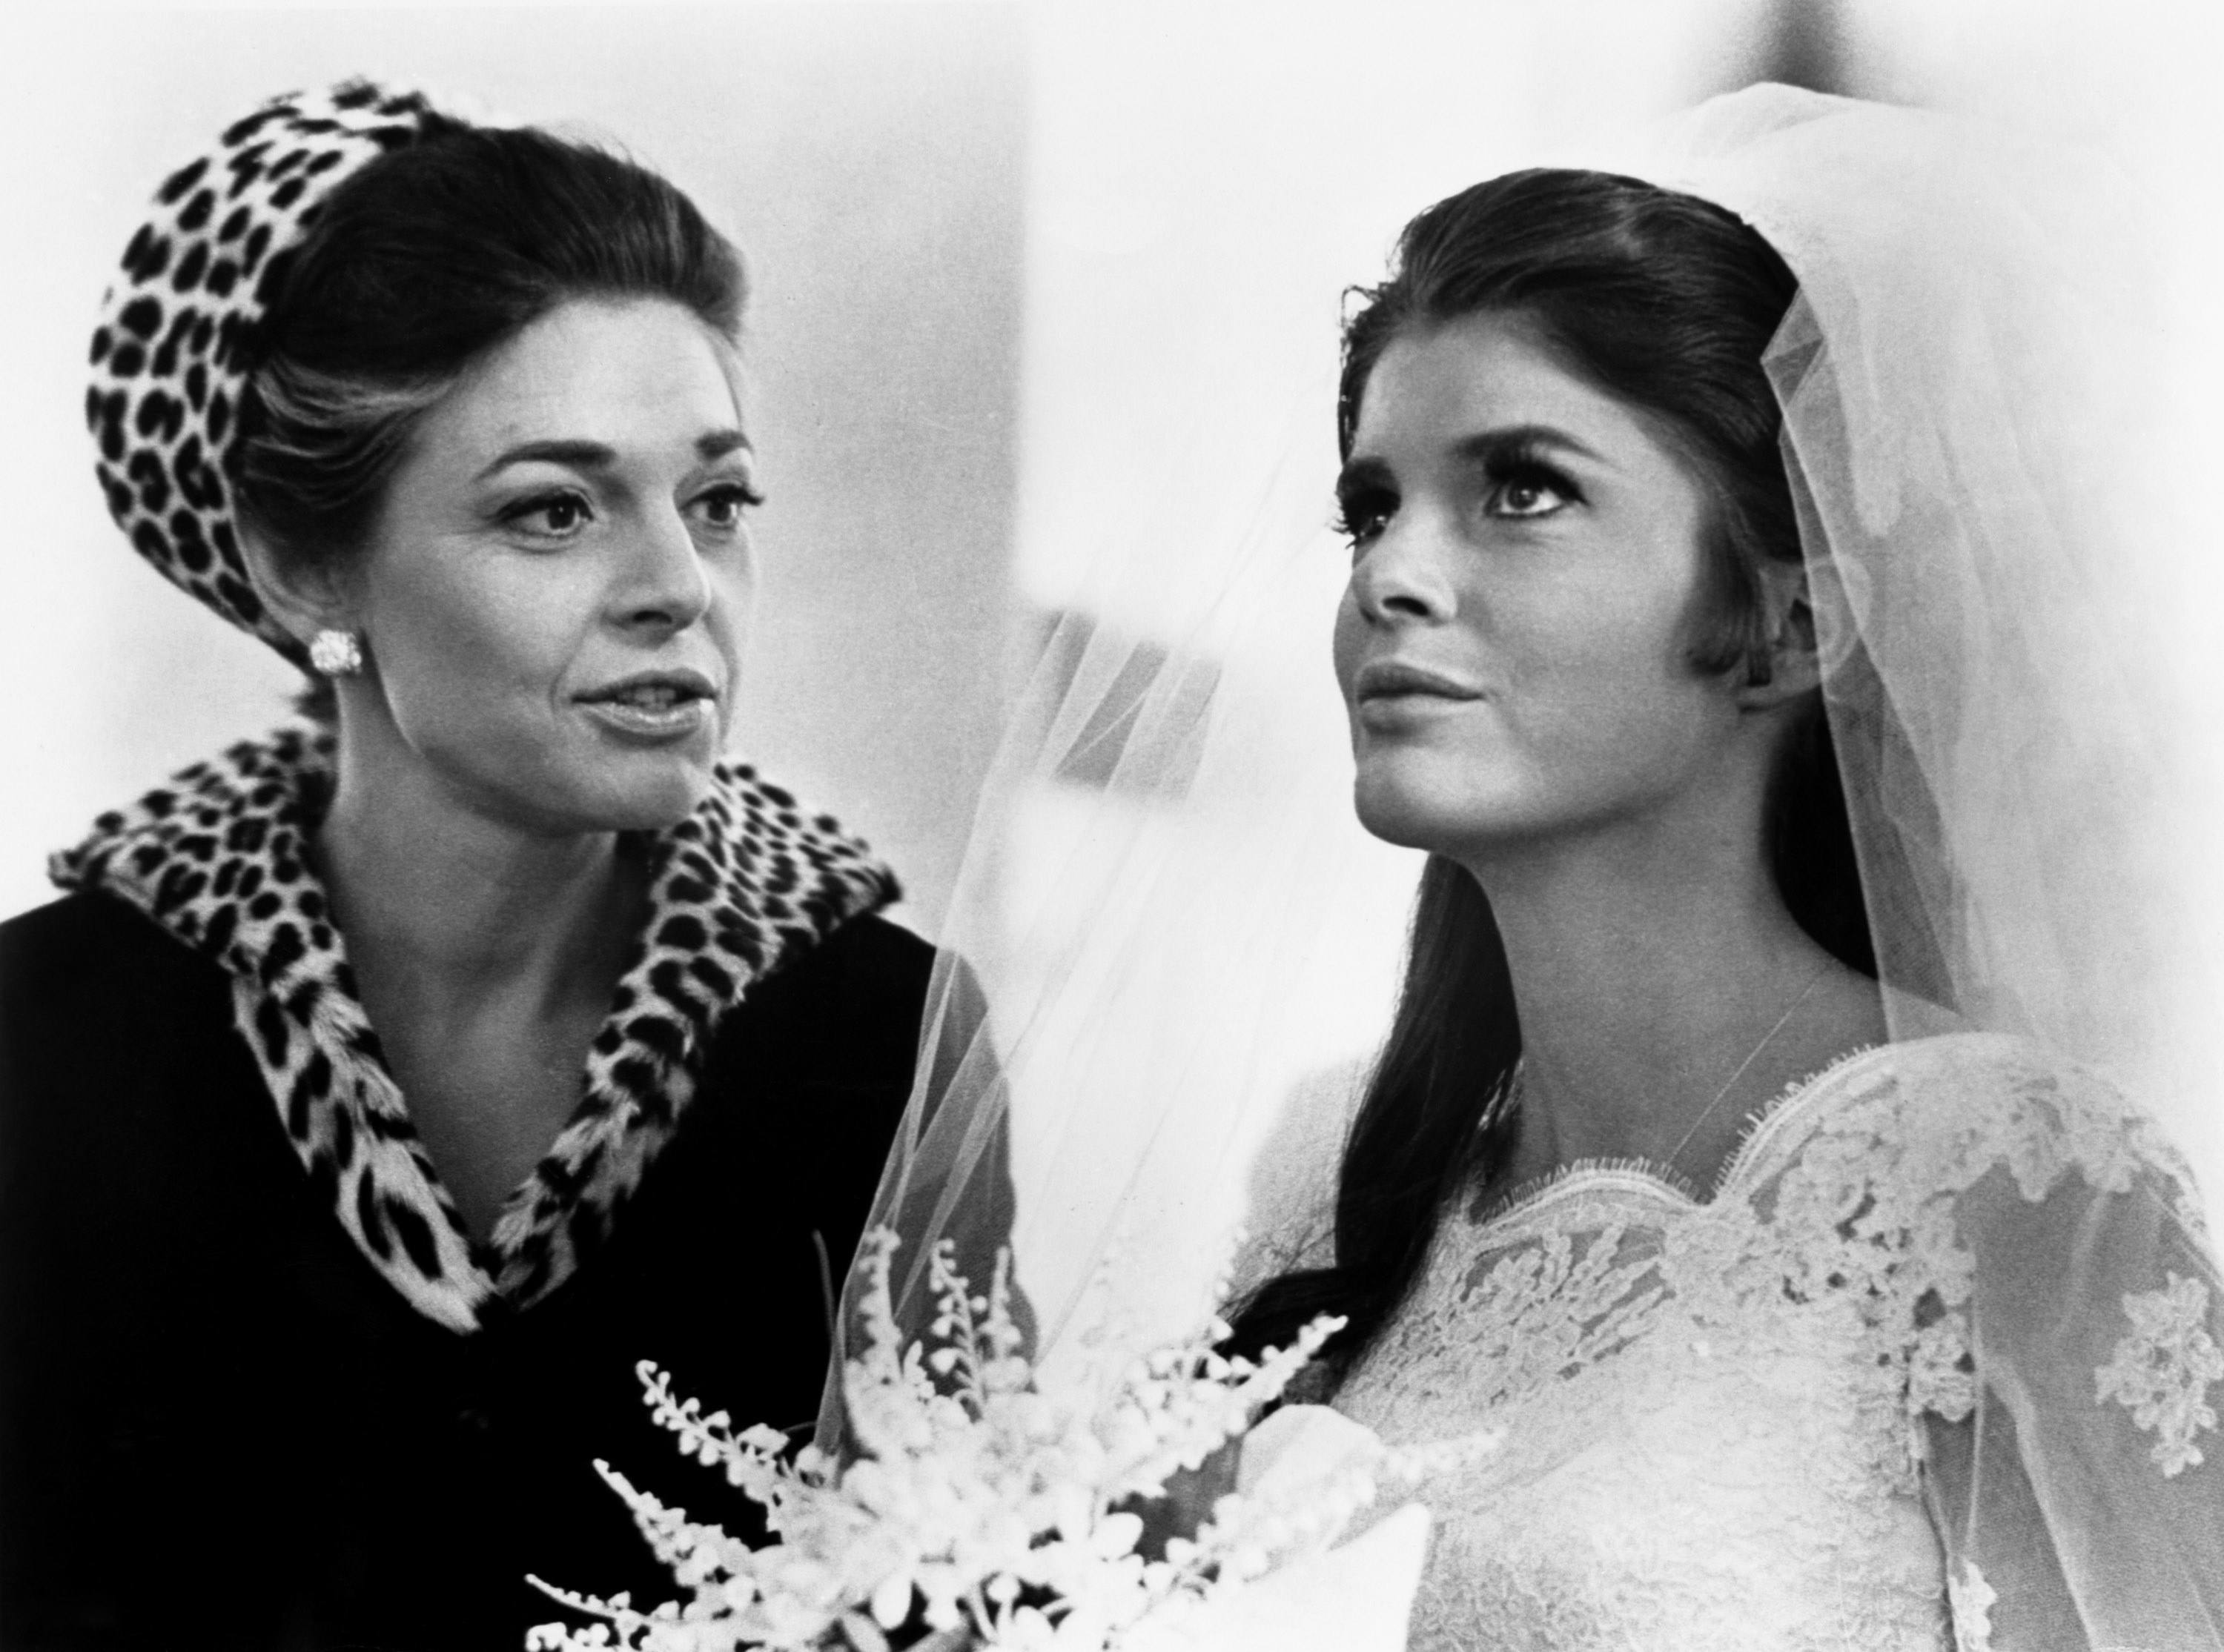 Mrs. Robinson standing by her daughter in a wedding dress